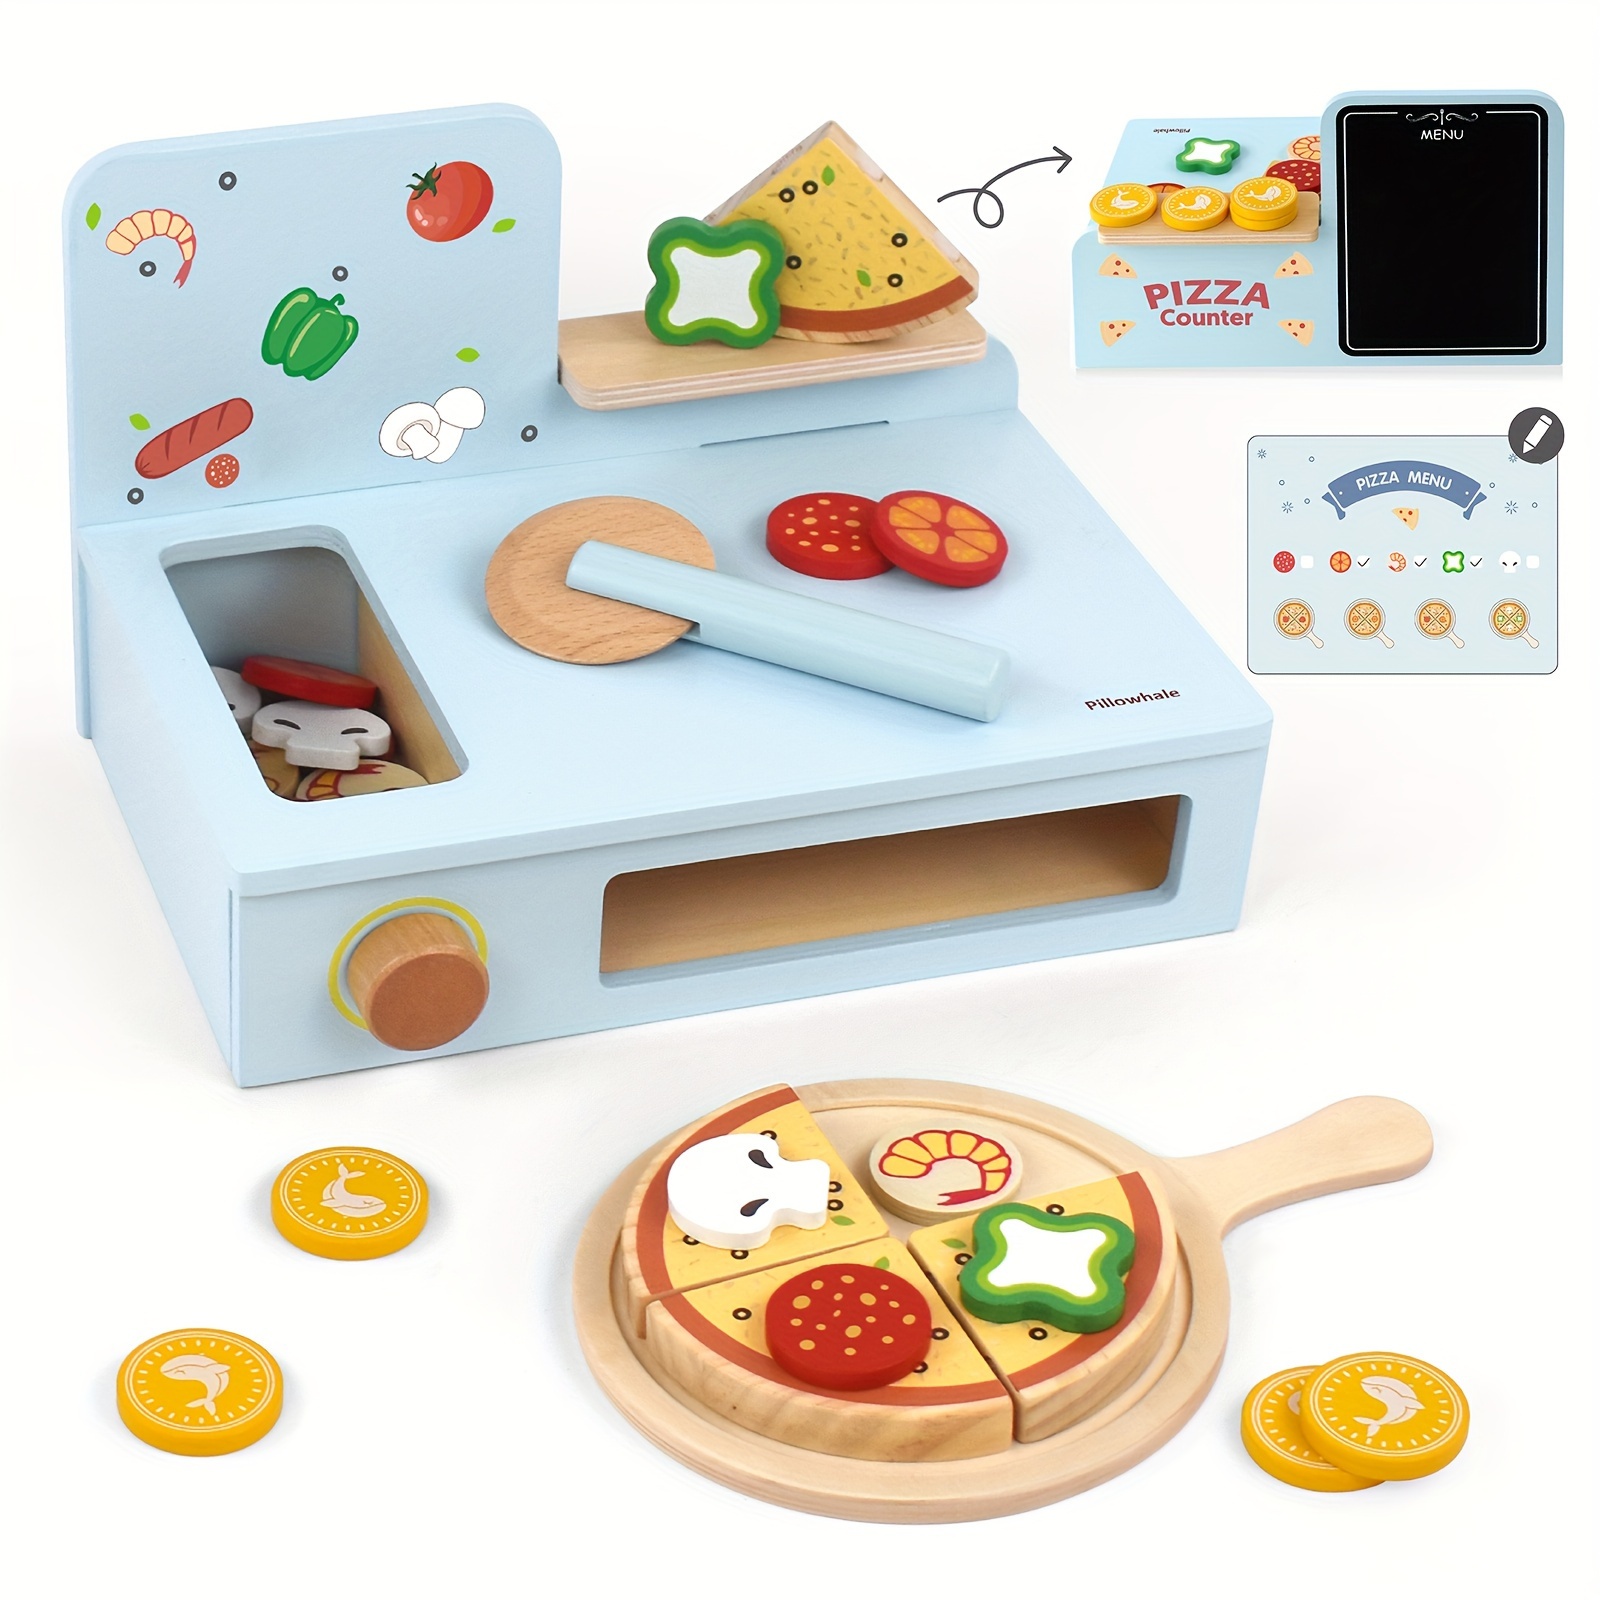 

Wooden Pizza Toy Set, Kids Pretend Play Food For Kitchen, Wooden Pizza Counter Play Set, Play Kitchen Accessories For Toddlers Boys Girls Ages 3+